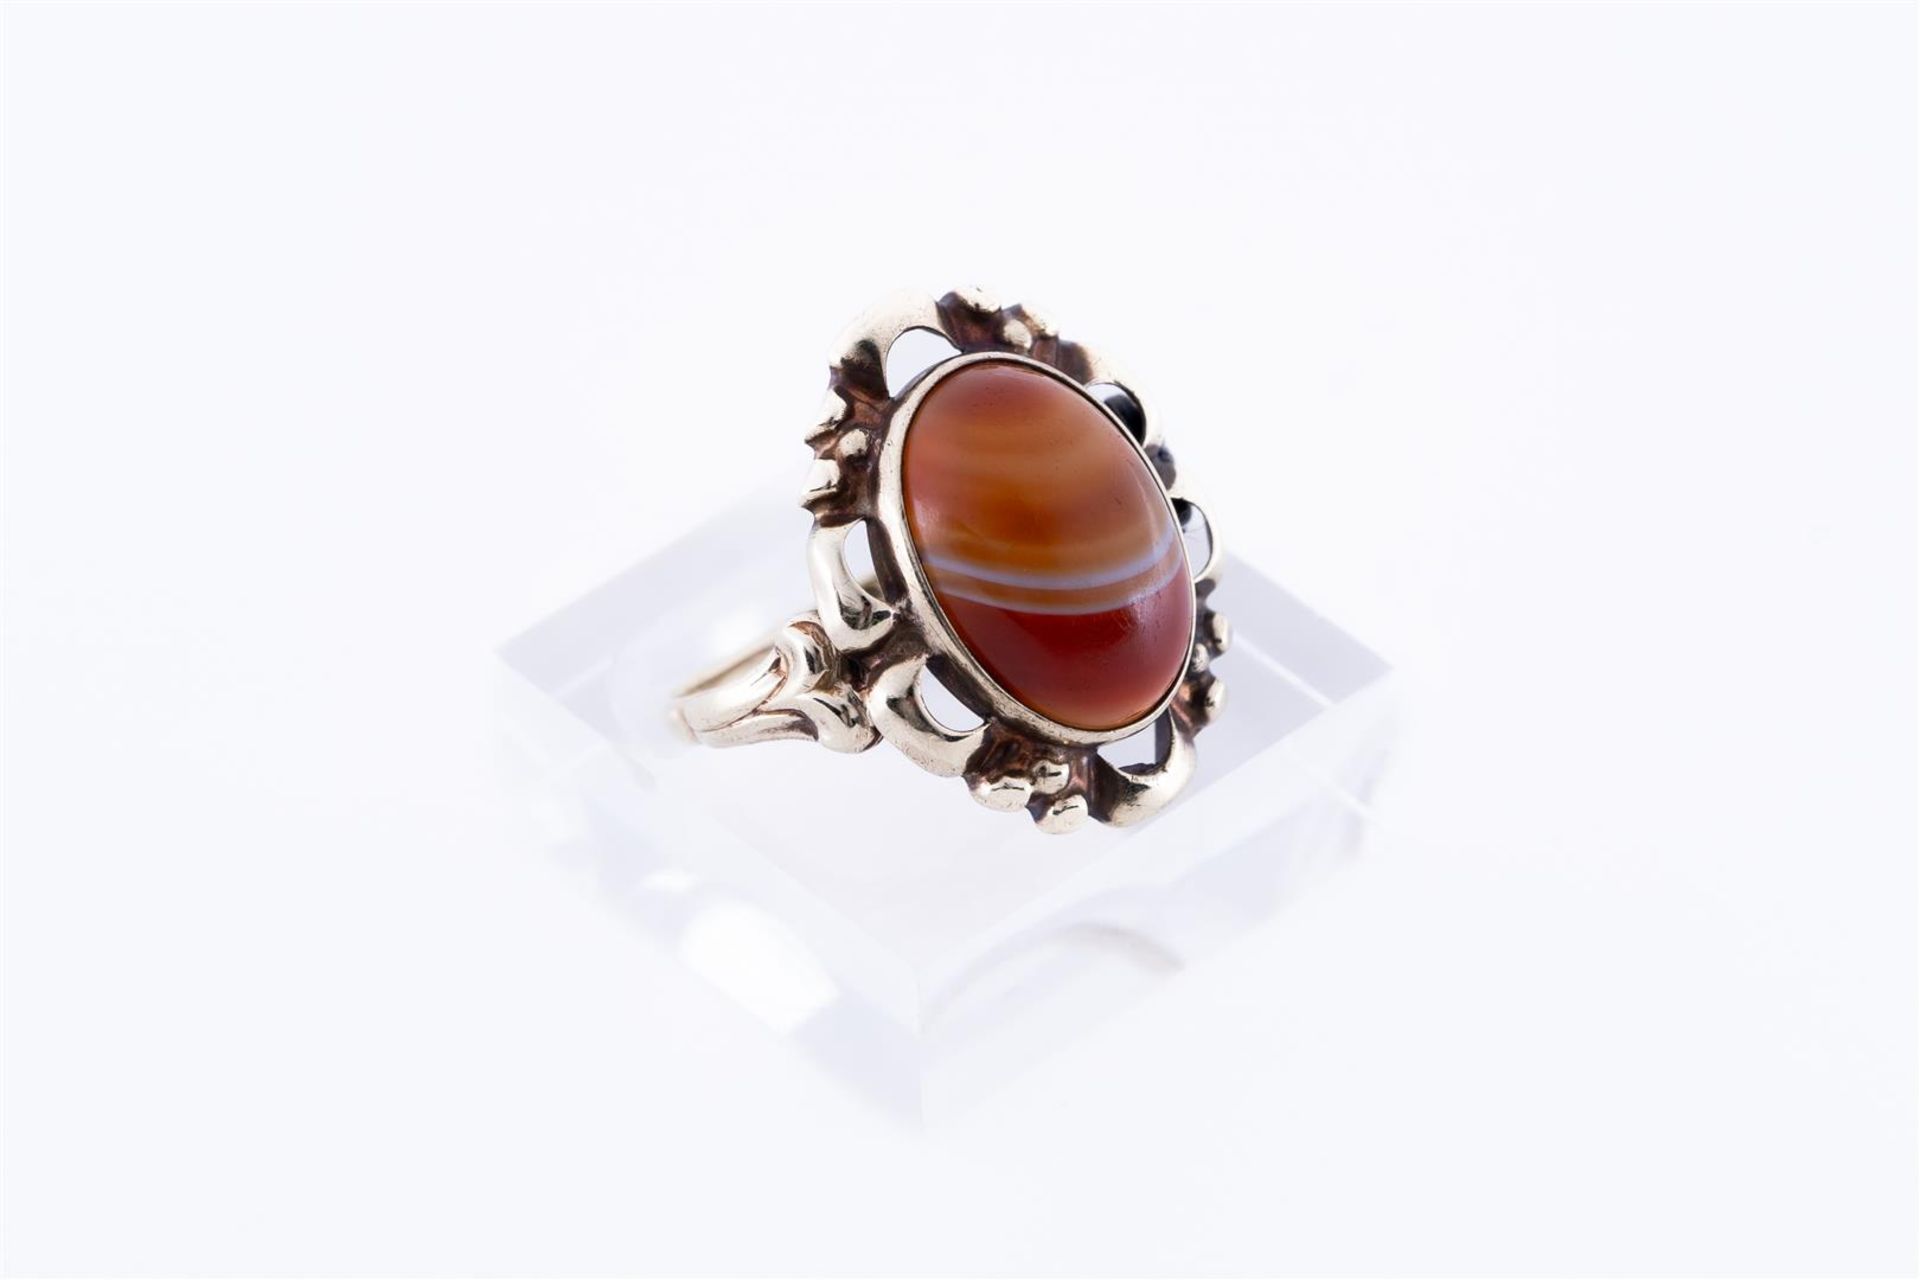 9kt Yellow gold ring with beautiful openwork edge, the ring is set with a single agate gemstone. The